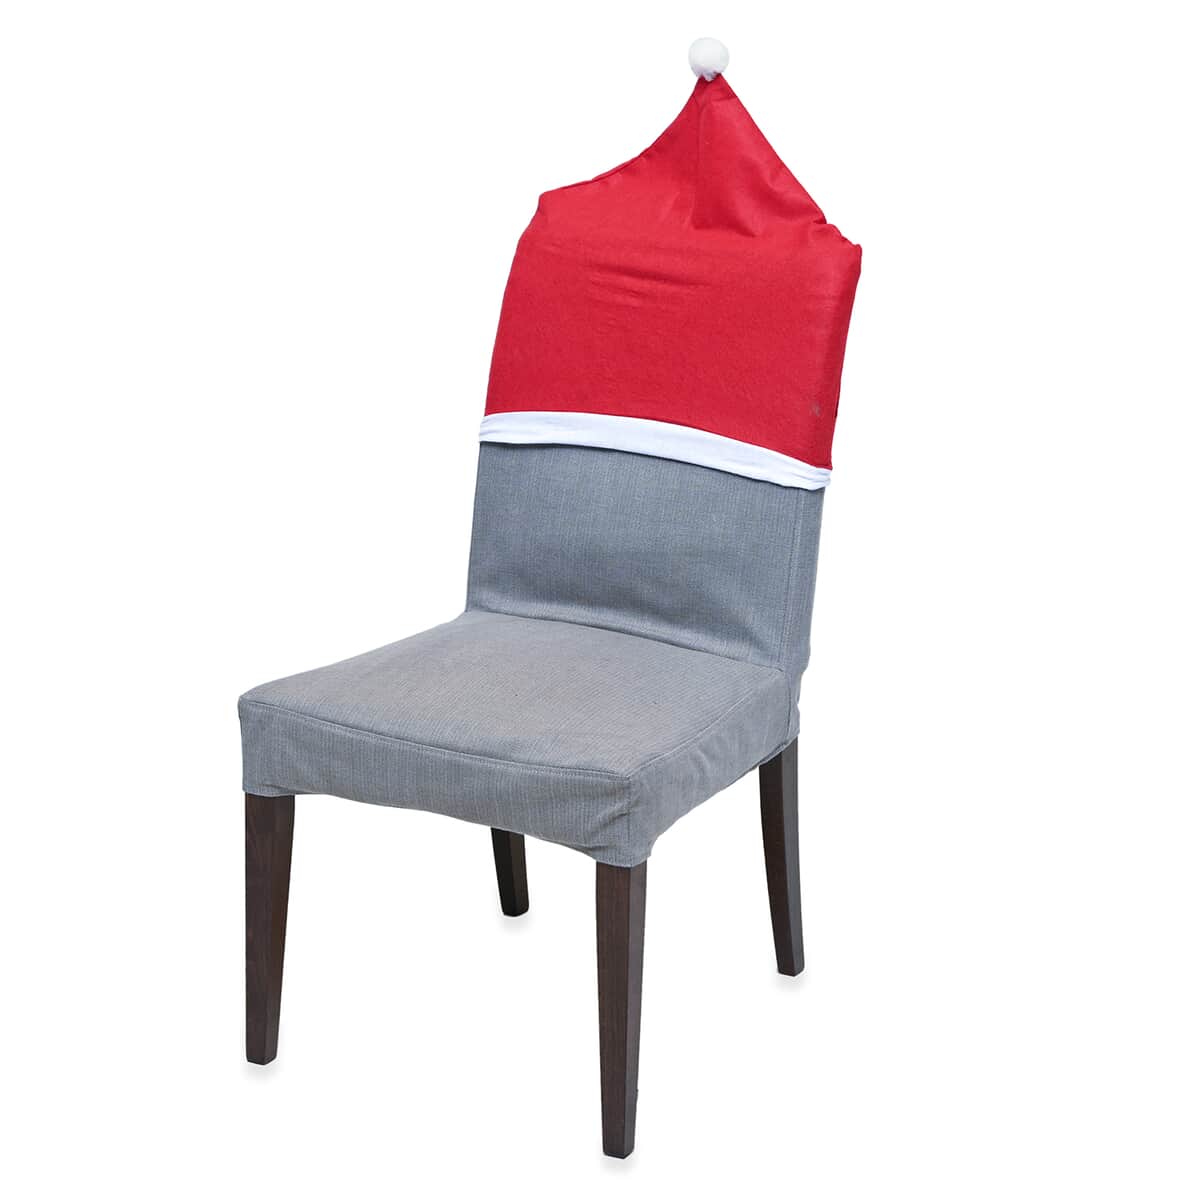 Set of 6 Pieces Red Chair Cover image number 6